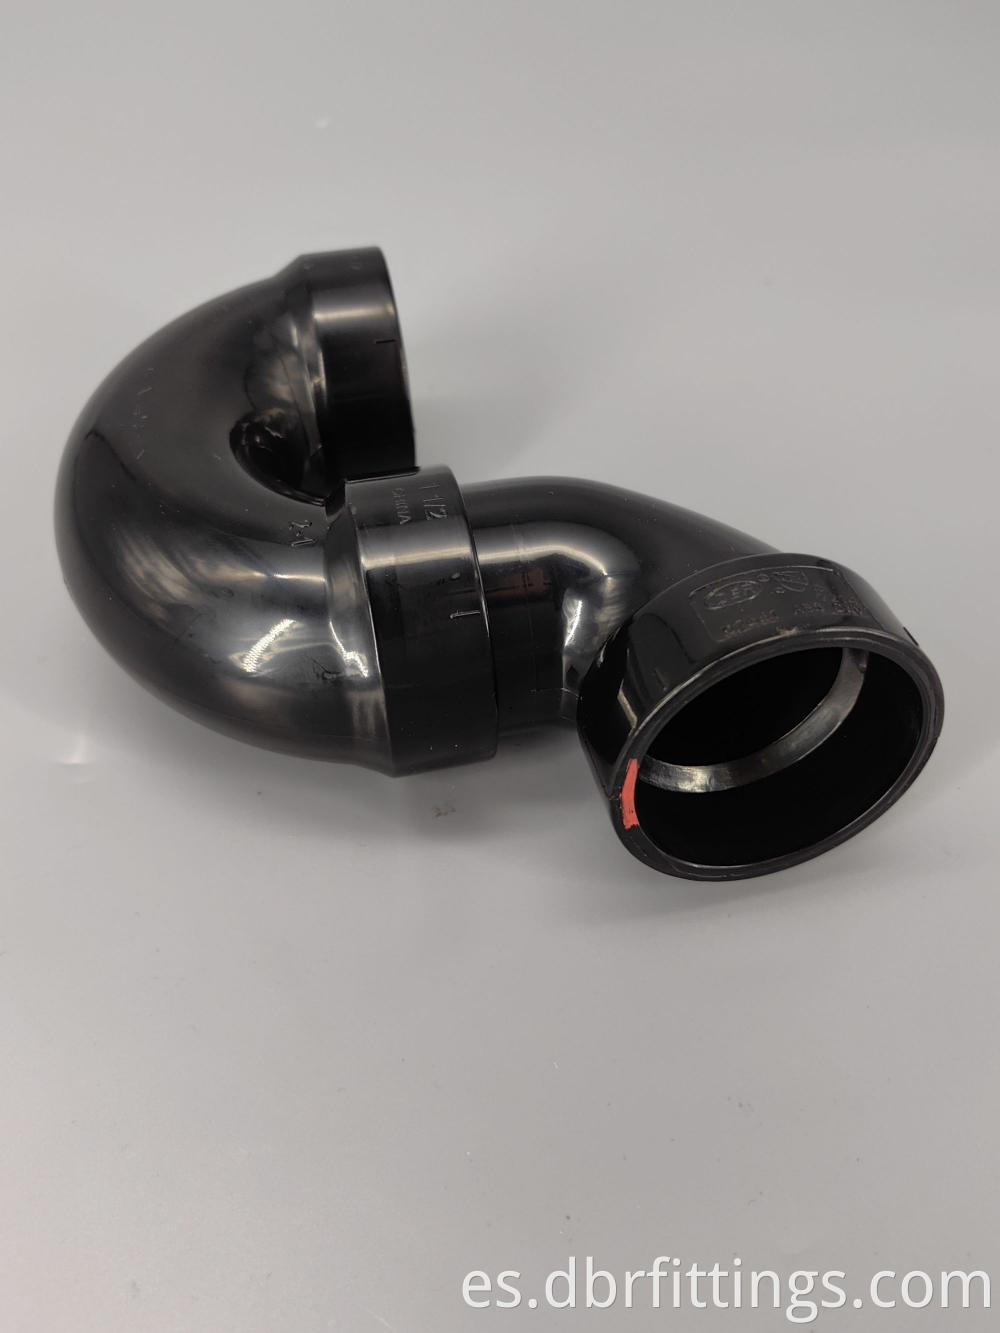 ABS fittings P-TRAP W/SOLVENT WELD JOINT for Plumbers